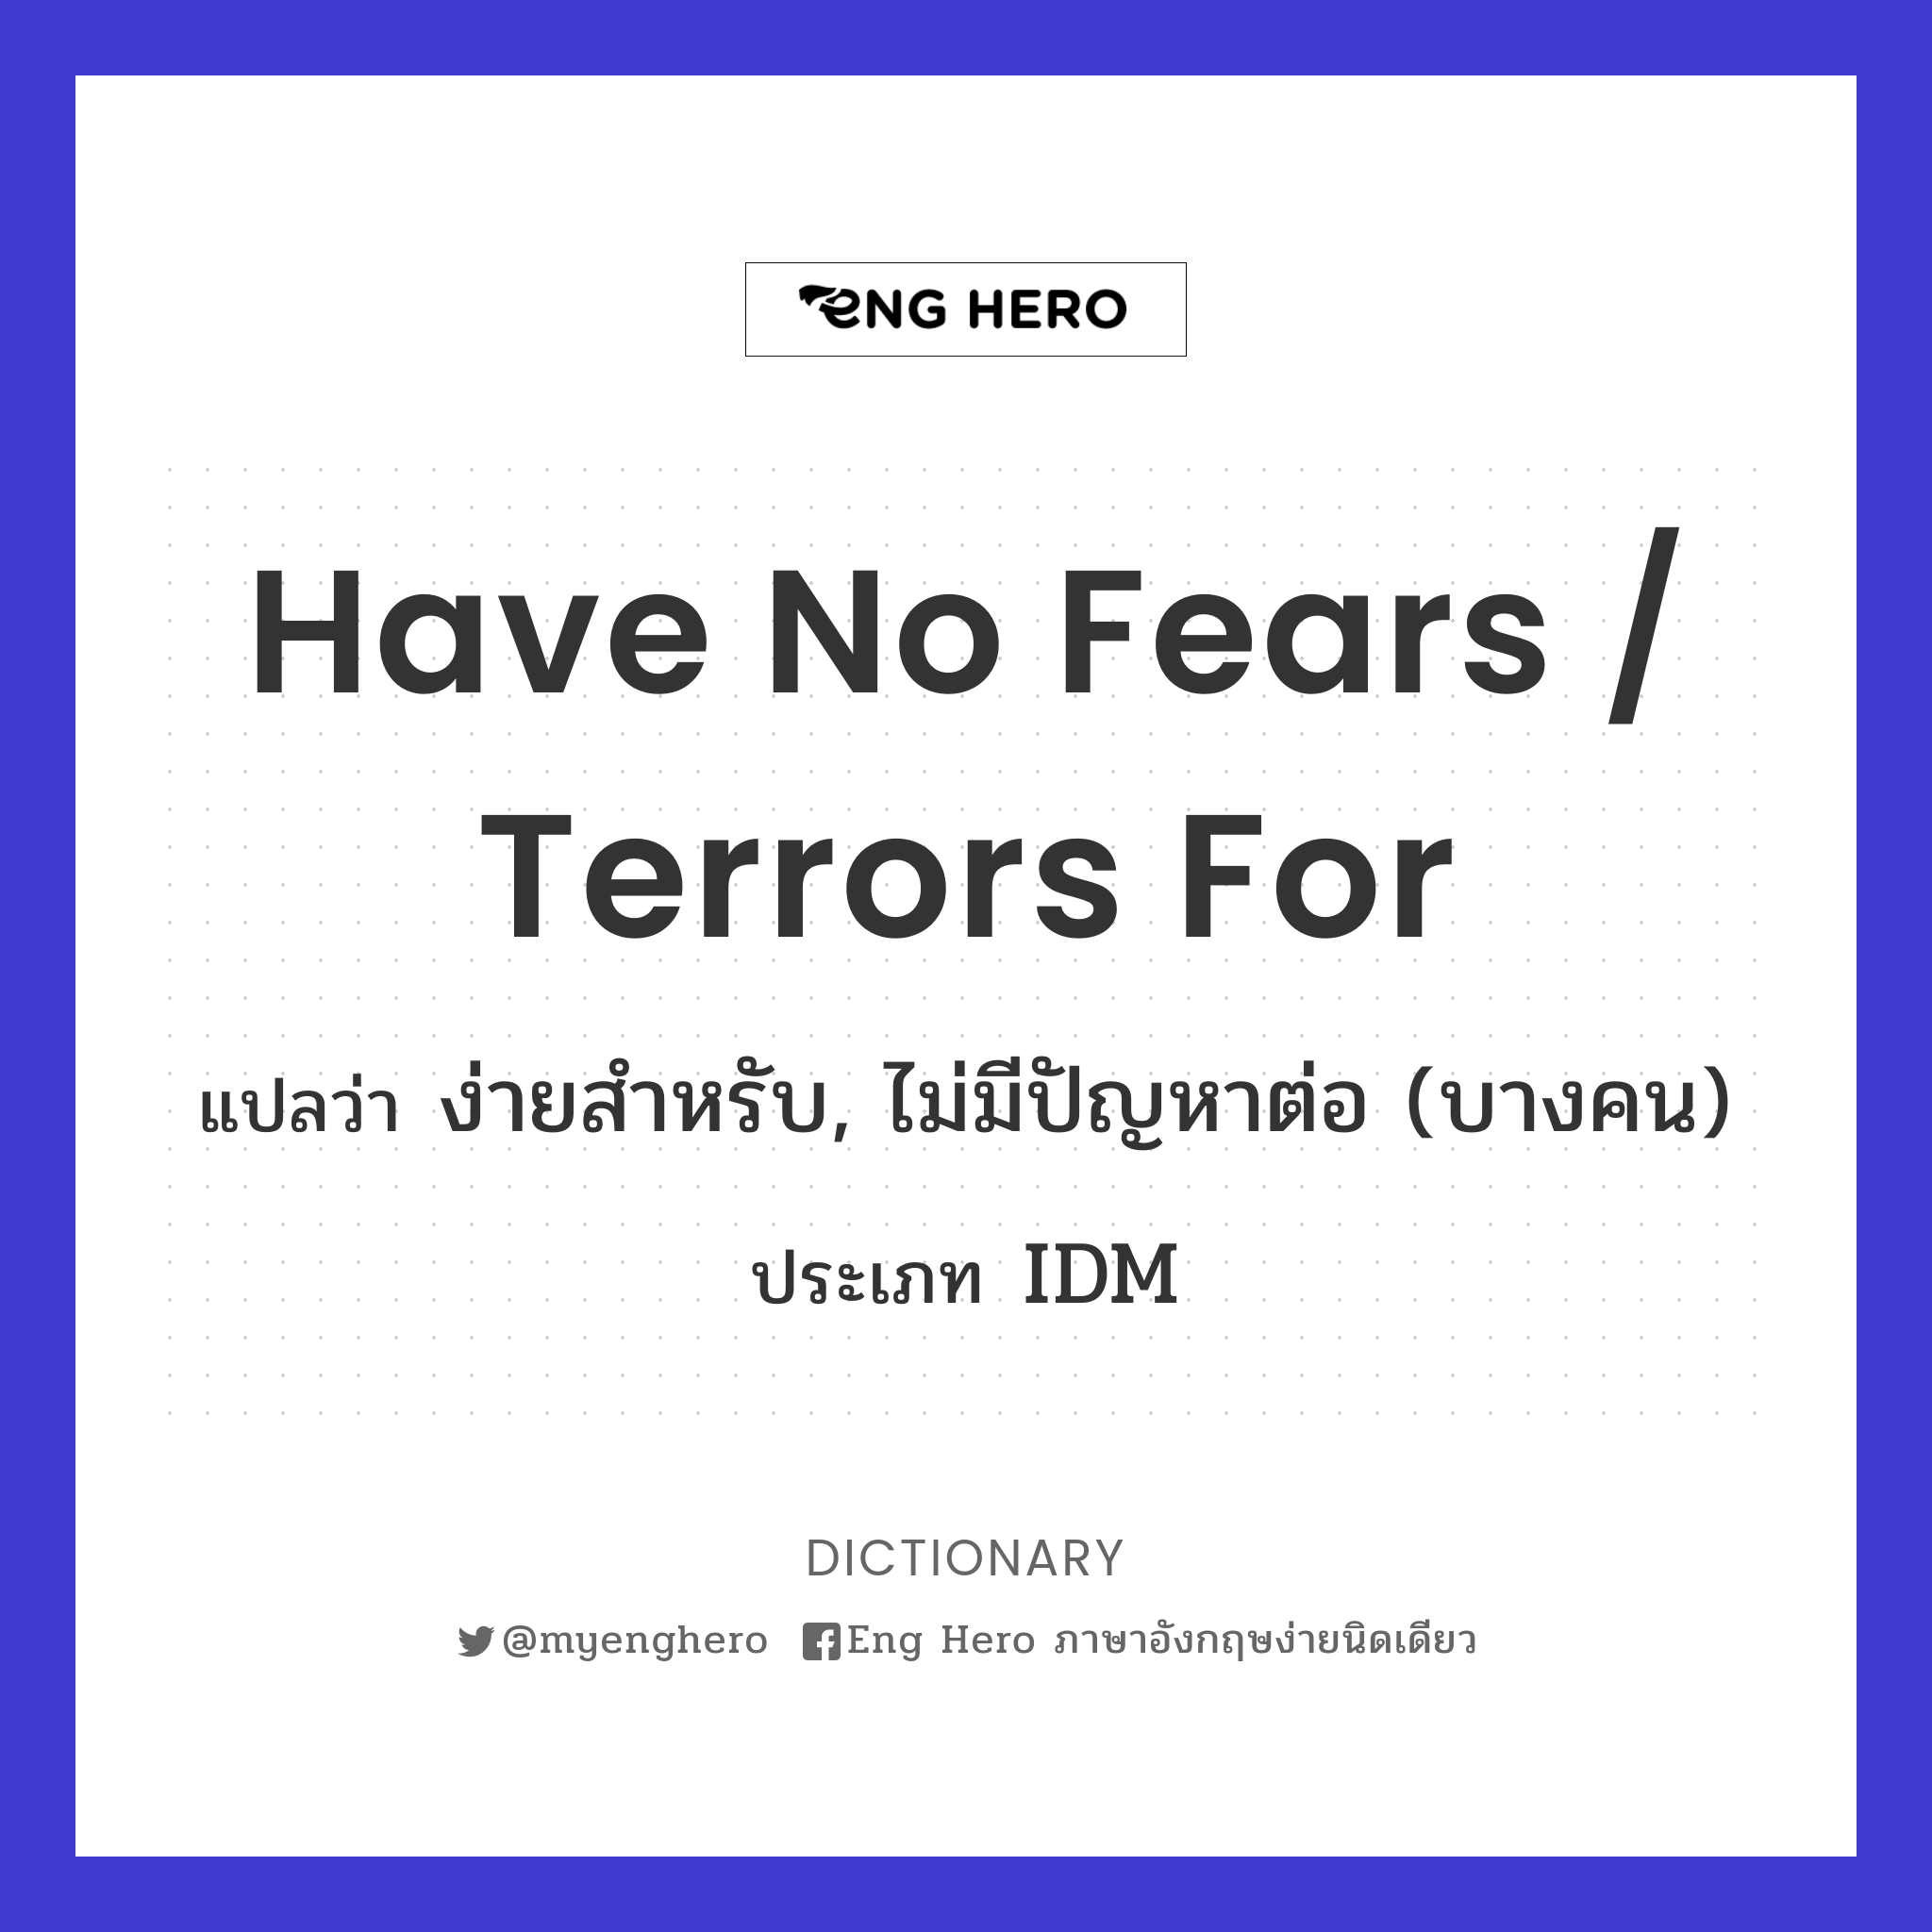 have no fears / terrors for